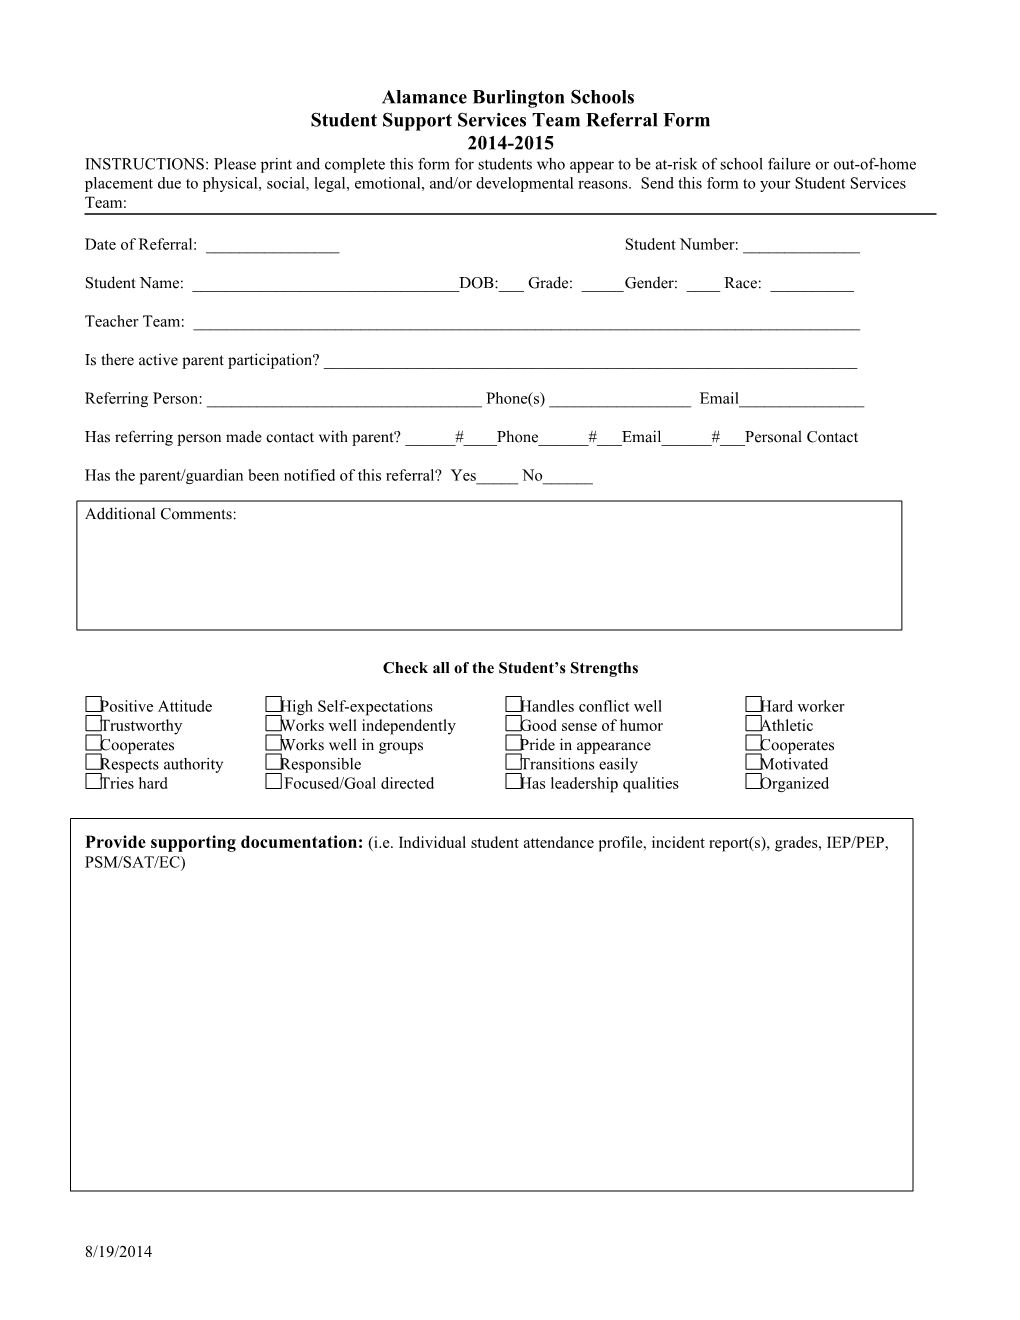 Student Support Services Team Referral Form